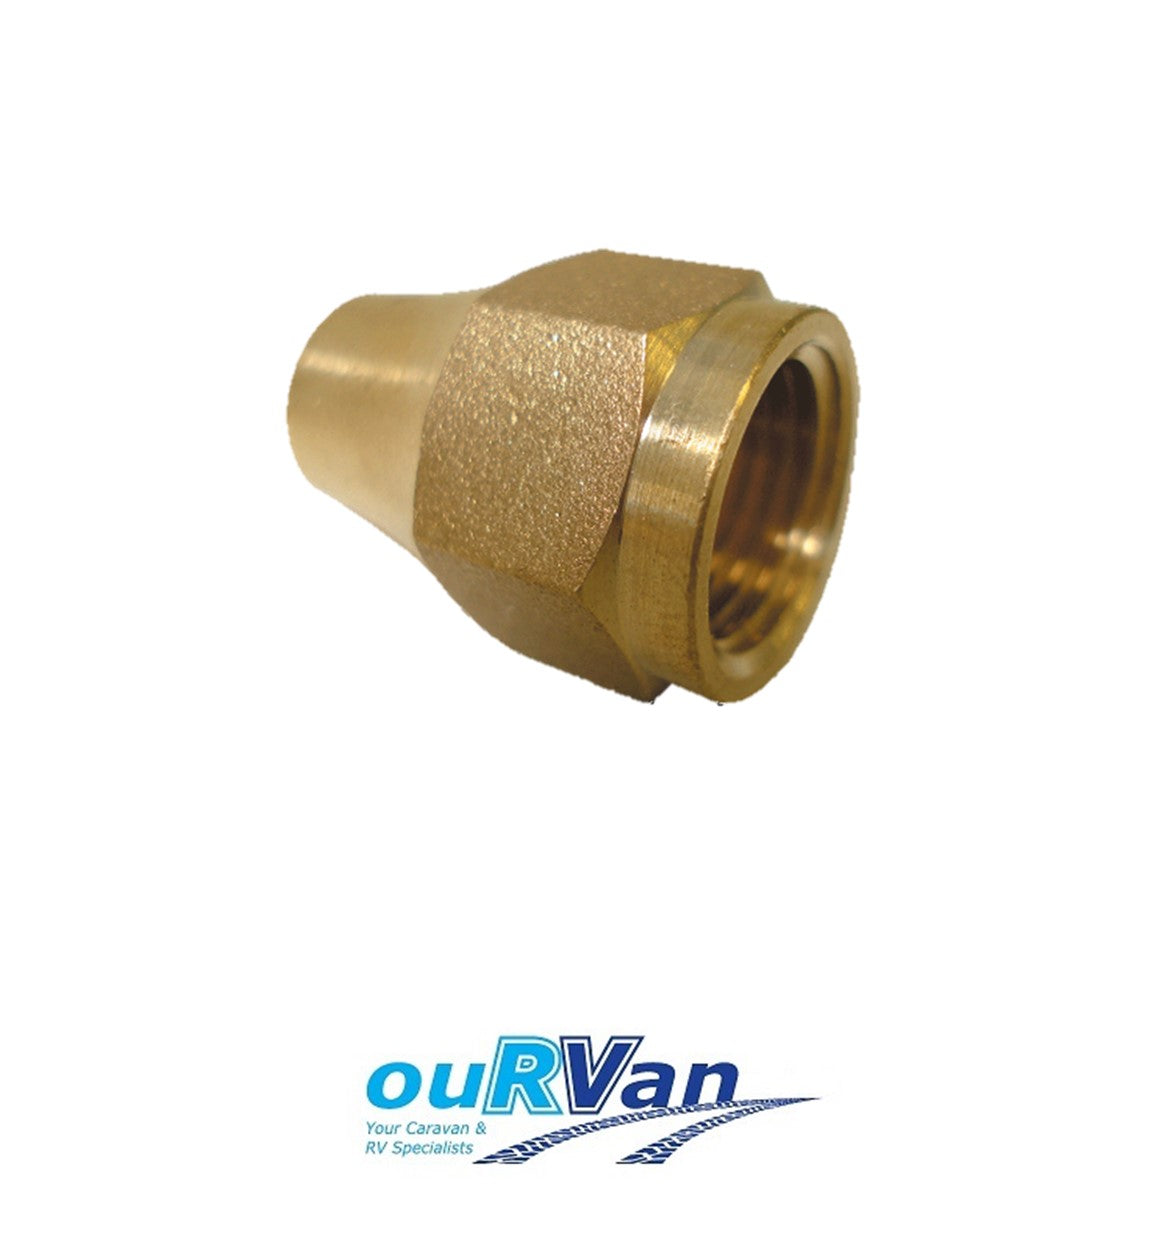 No. 6 5/16" Brass flare nut for gas lines